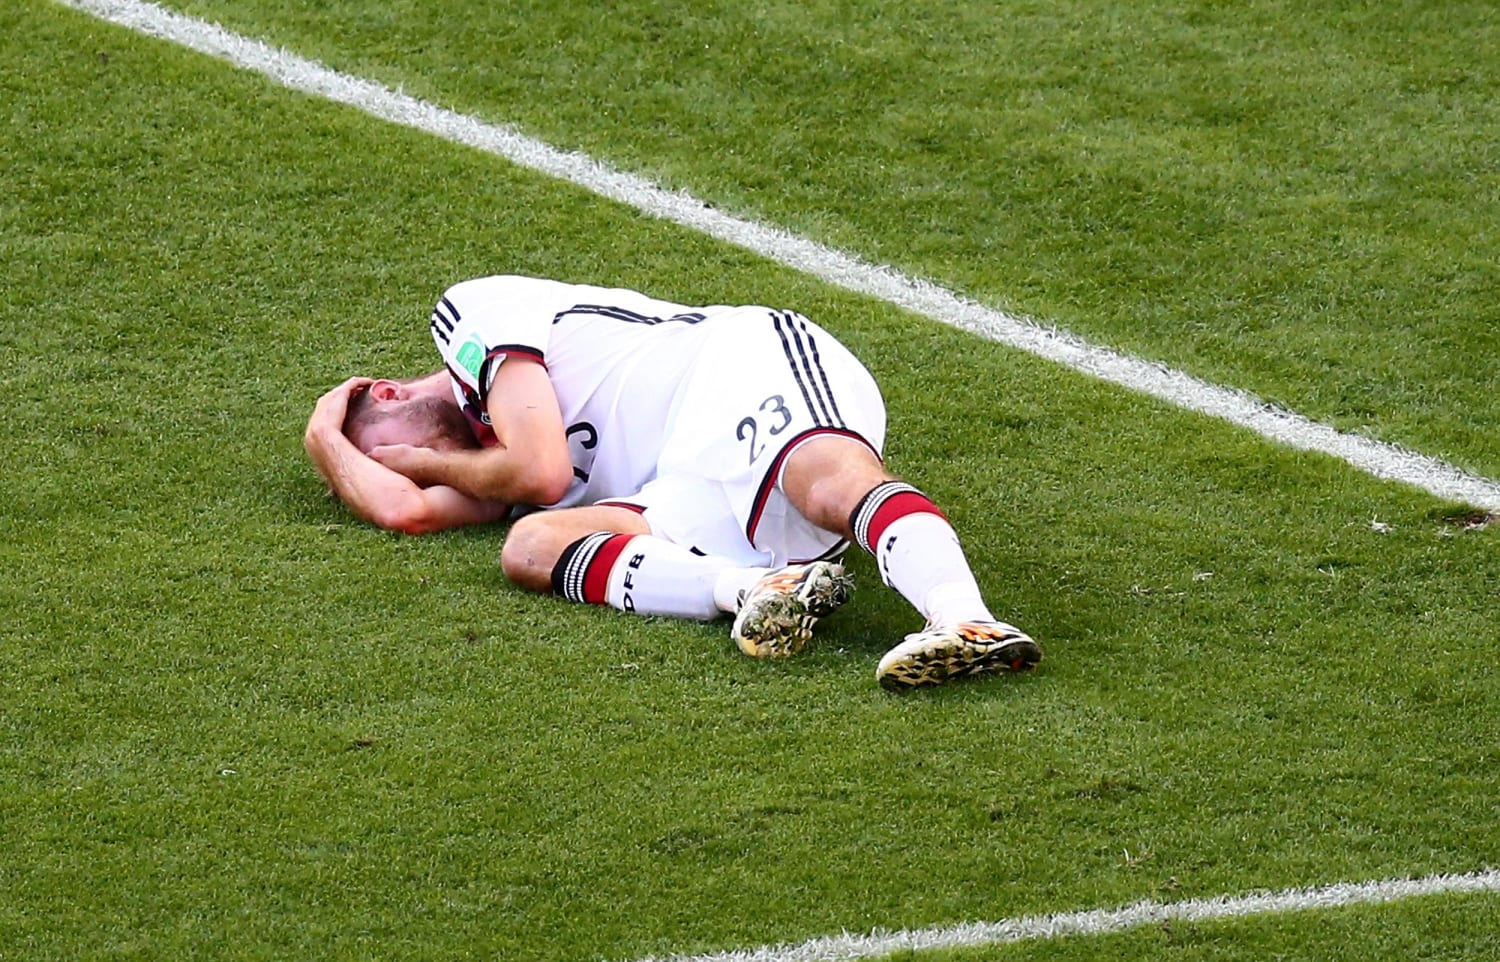 World Cup Injuries Spark Soccer Concussion Debate - NBC News